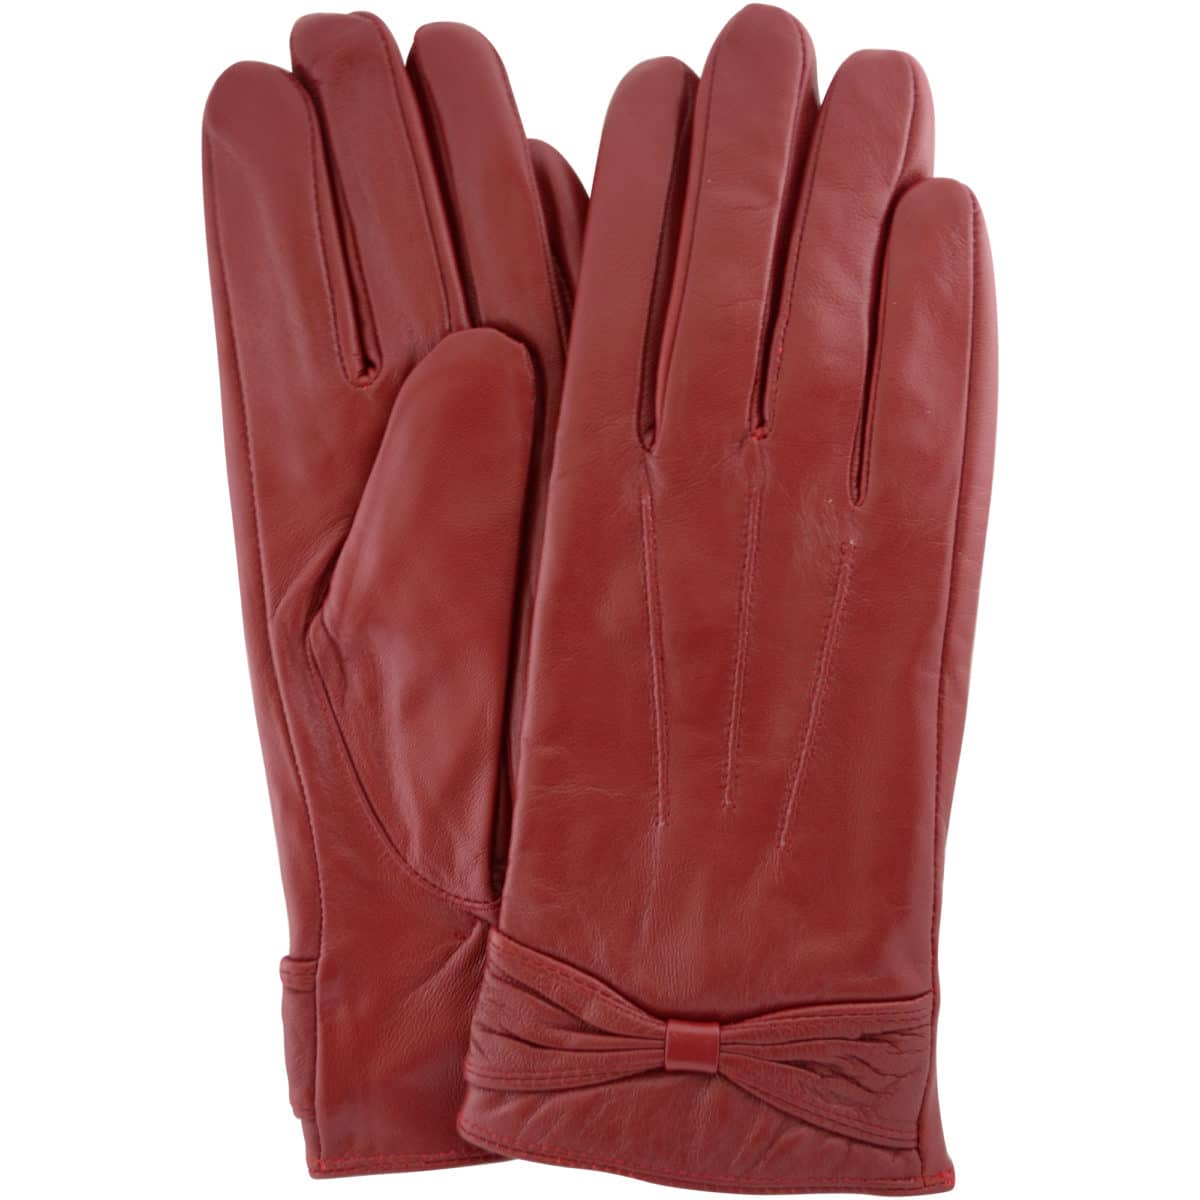 Alwen Leather Gloves with Ruched Bow Design - Berry Red SNUGRUGS